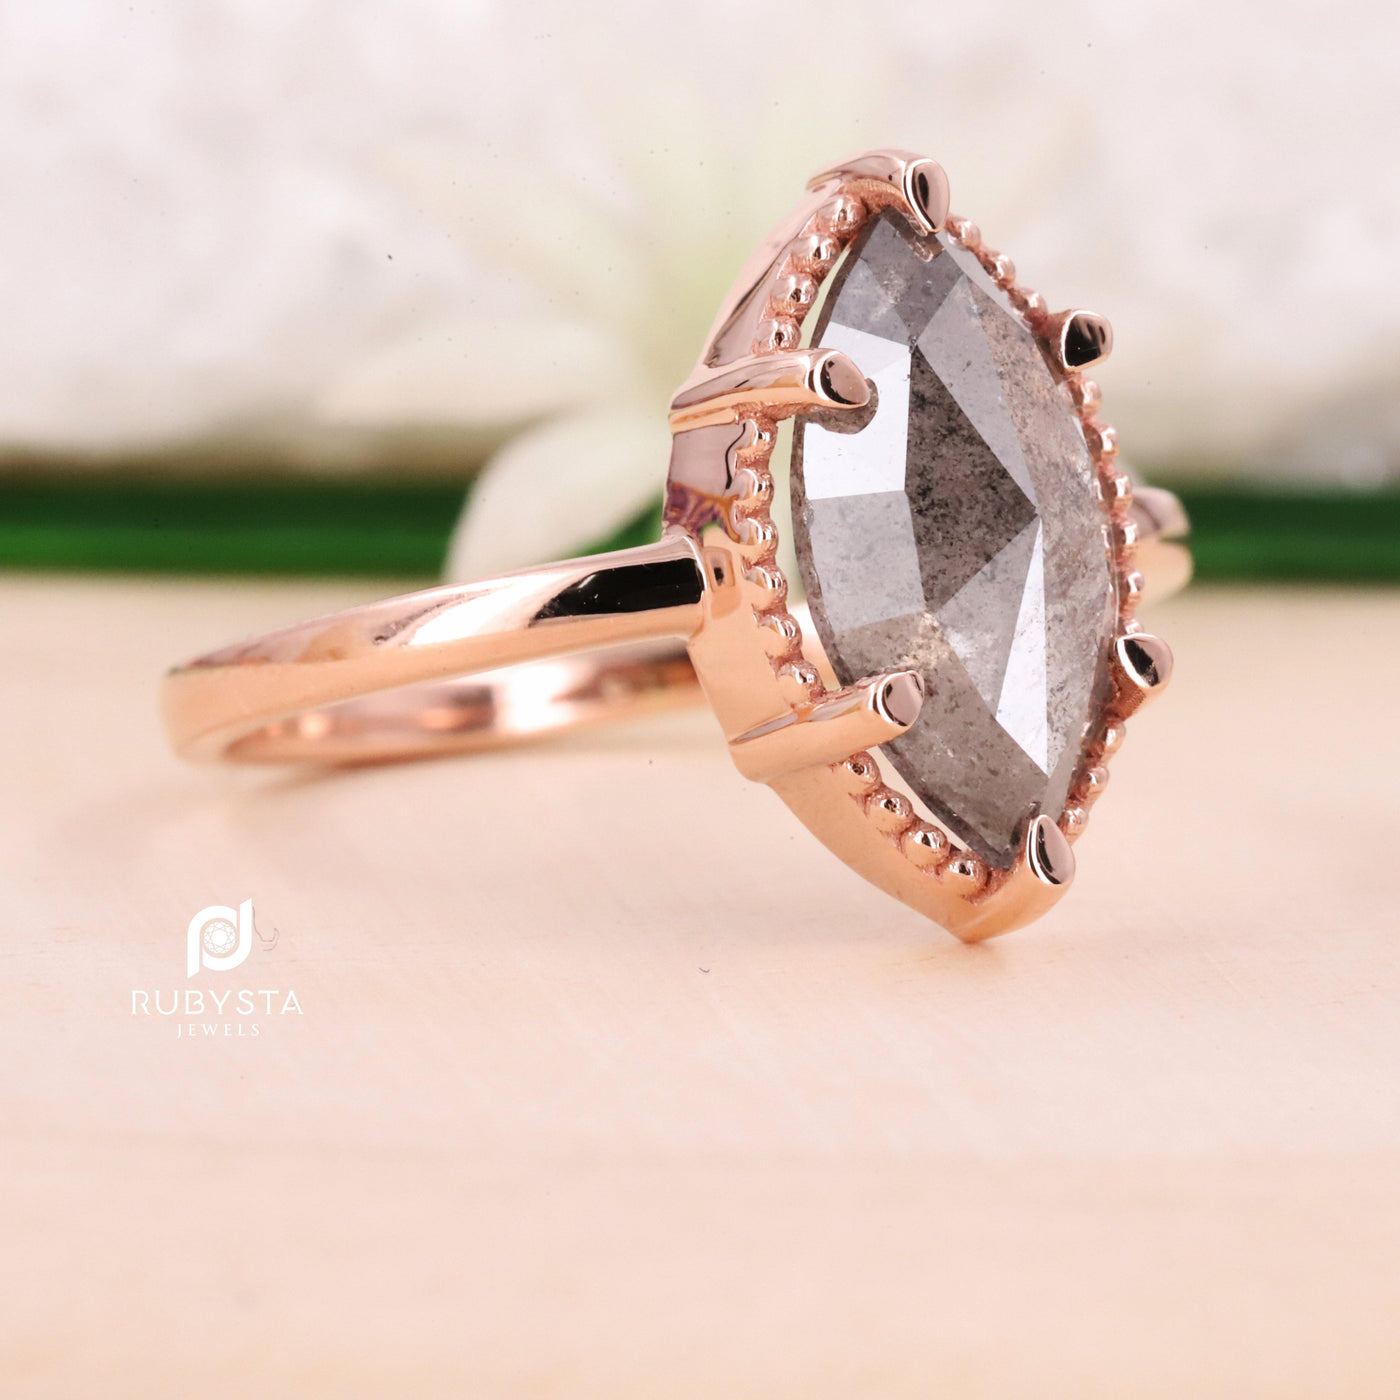 Salt and Pepper Marquise Diamond Ring | Engagement Ring | Marquise Diamond Ring - Rubysta